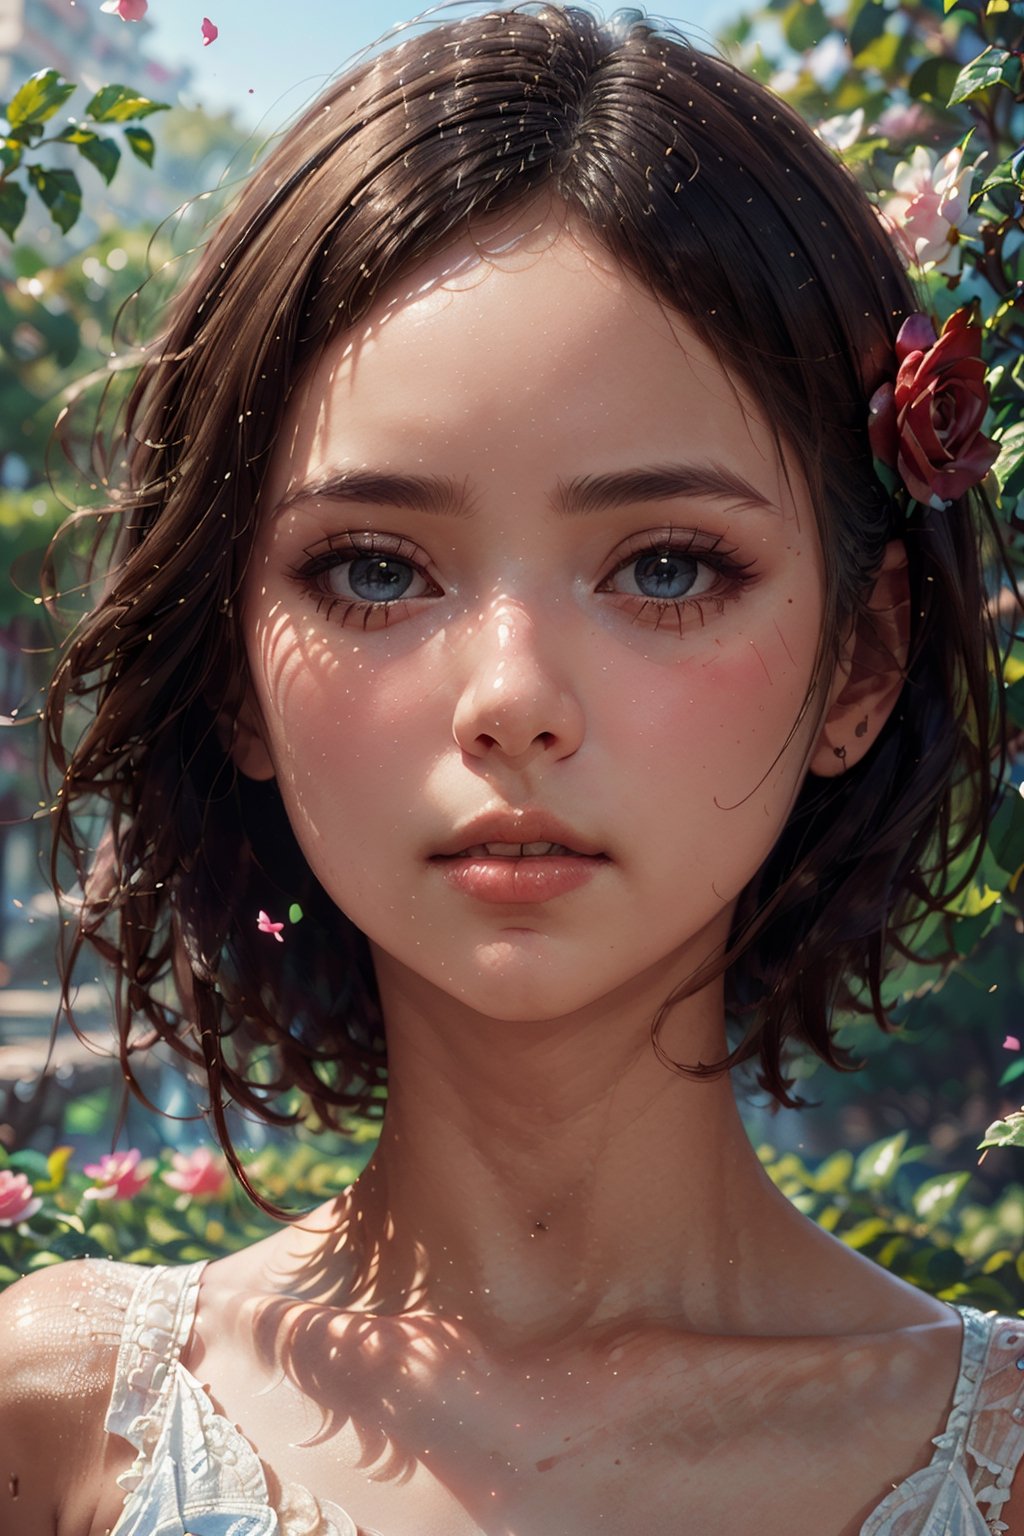 (masterpiece:1.05) (picturesque:1.05) (((extremely detailed CG unity 8k wallpaper))), too many flowers, 13 years old 1girl, from below, gloating, cute face, shy skin, sick face, pretty eyes, (hair ornament:1.5), sitting, ((blonde hair)), ((blue eyes)), ((closed mouth)), ((one girl all over the screen)), (((portrait, extra wide shot))), waterfall, (pillar of bridge), fairy tale, fancy, wind, sparkle, light rays lens flare light particles, hyper detailed, high detail, exquisite detail, cinematic lighting, sharp focus, bokeh highlight, post-processing, Inpaint at full resolution, (realistic: 1.4), (illustration: 1.2), Angelonia, Rich red dress with lots of lace and frills, ((fluttering petals)), rose vines, extra wide shot, 